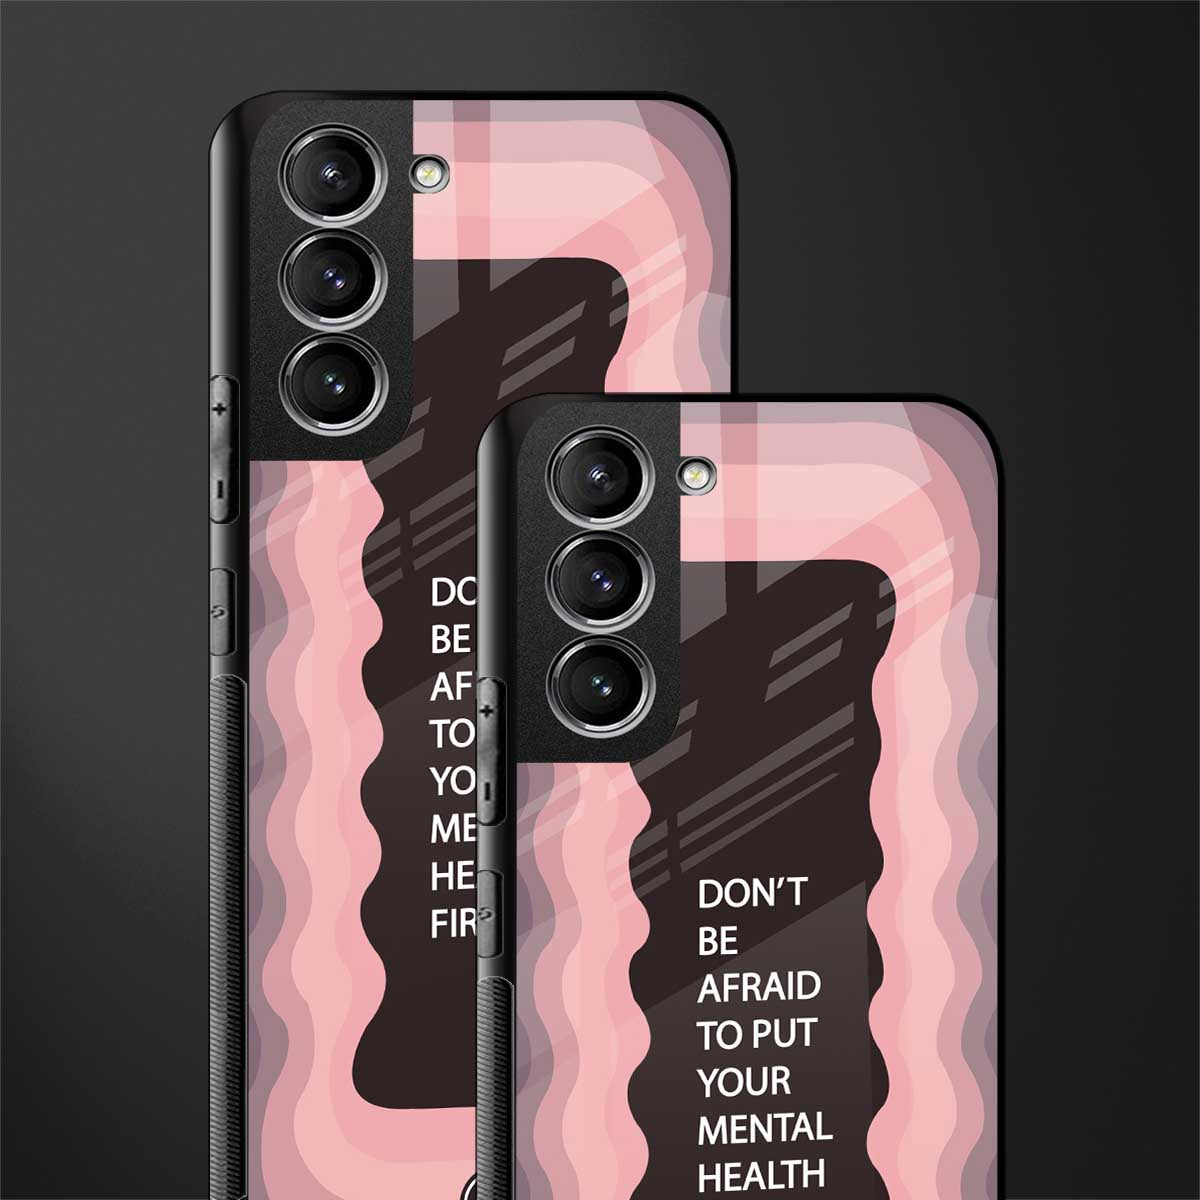 mental health first glass case for samsung galaxy s21 plus